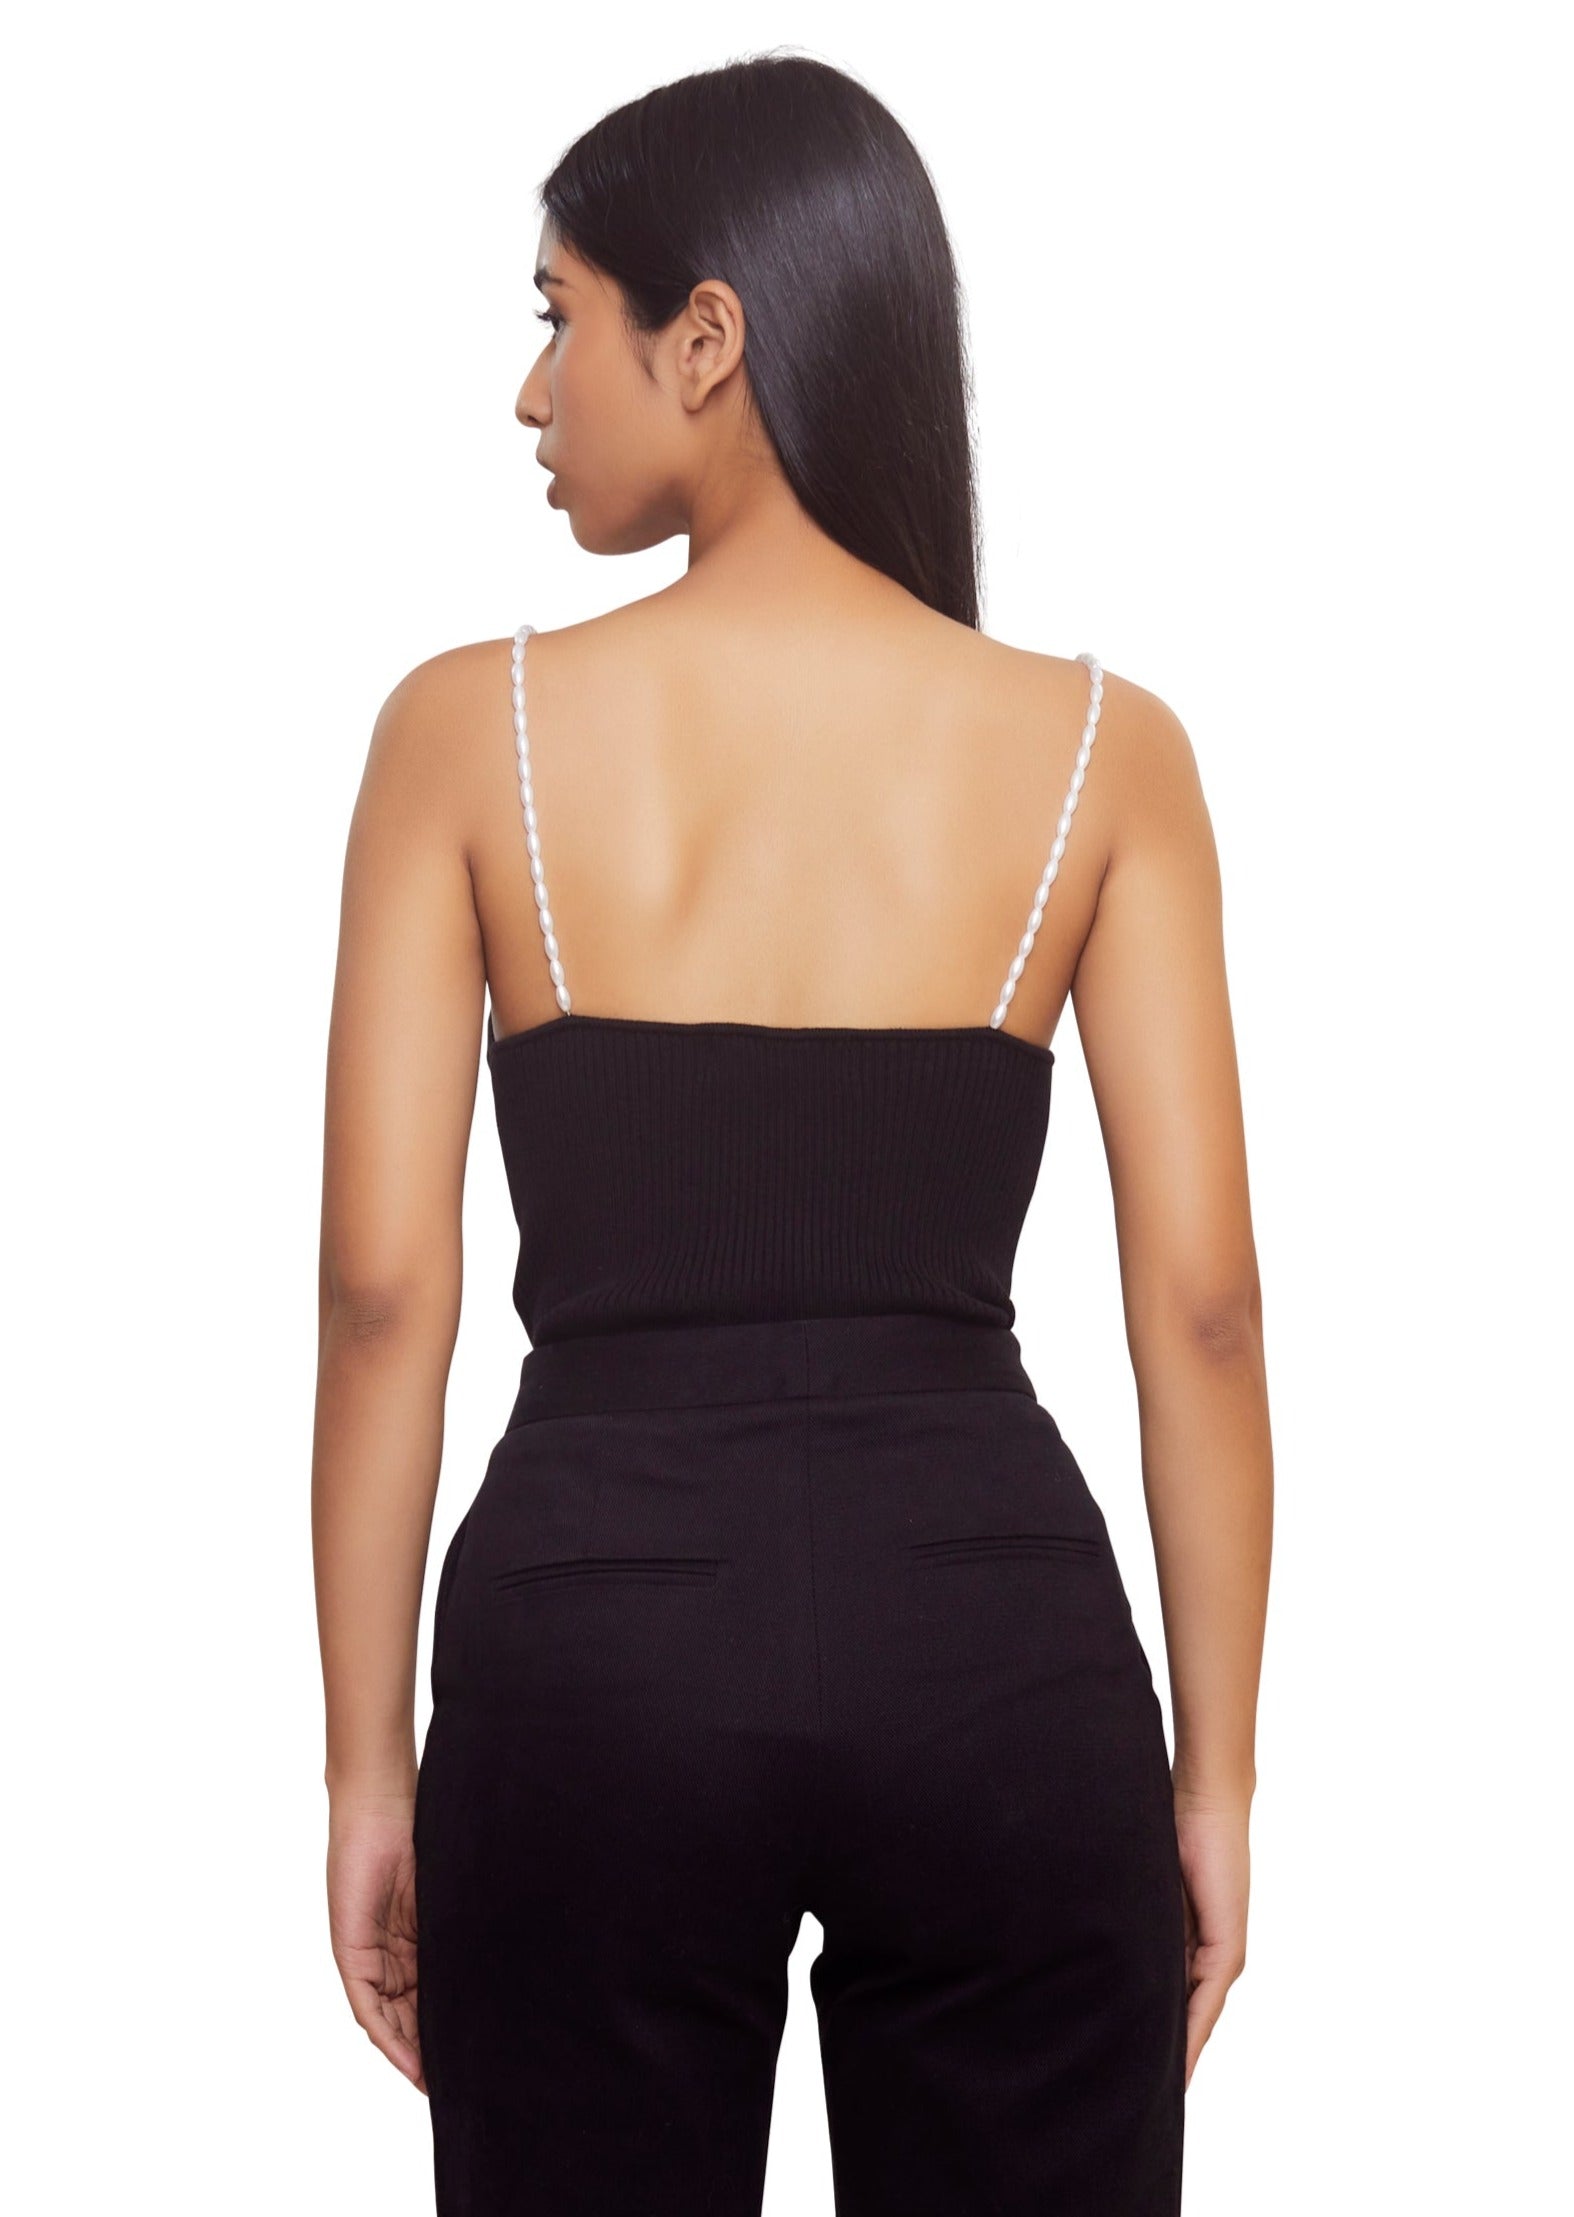 Black halter top in ribs with Pearl straps and low back from the brand Musier